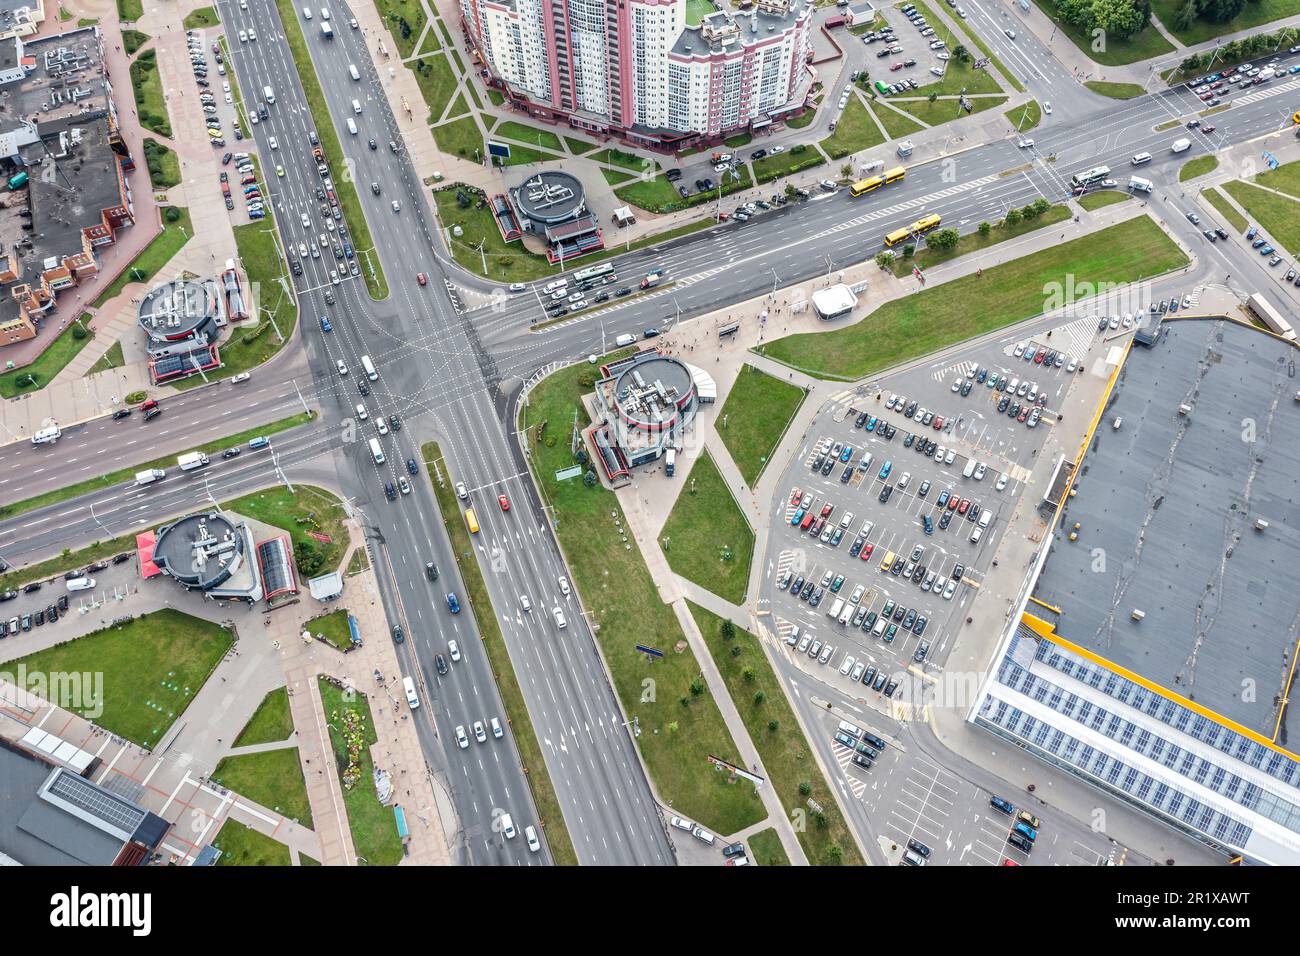 aerial city view with crossroads streets, apartment buildings, shopping mall and parking lots Stock Photo